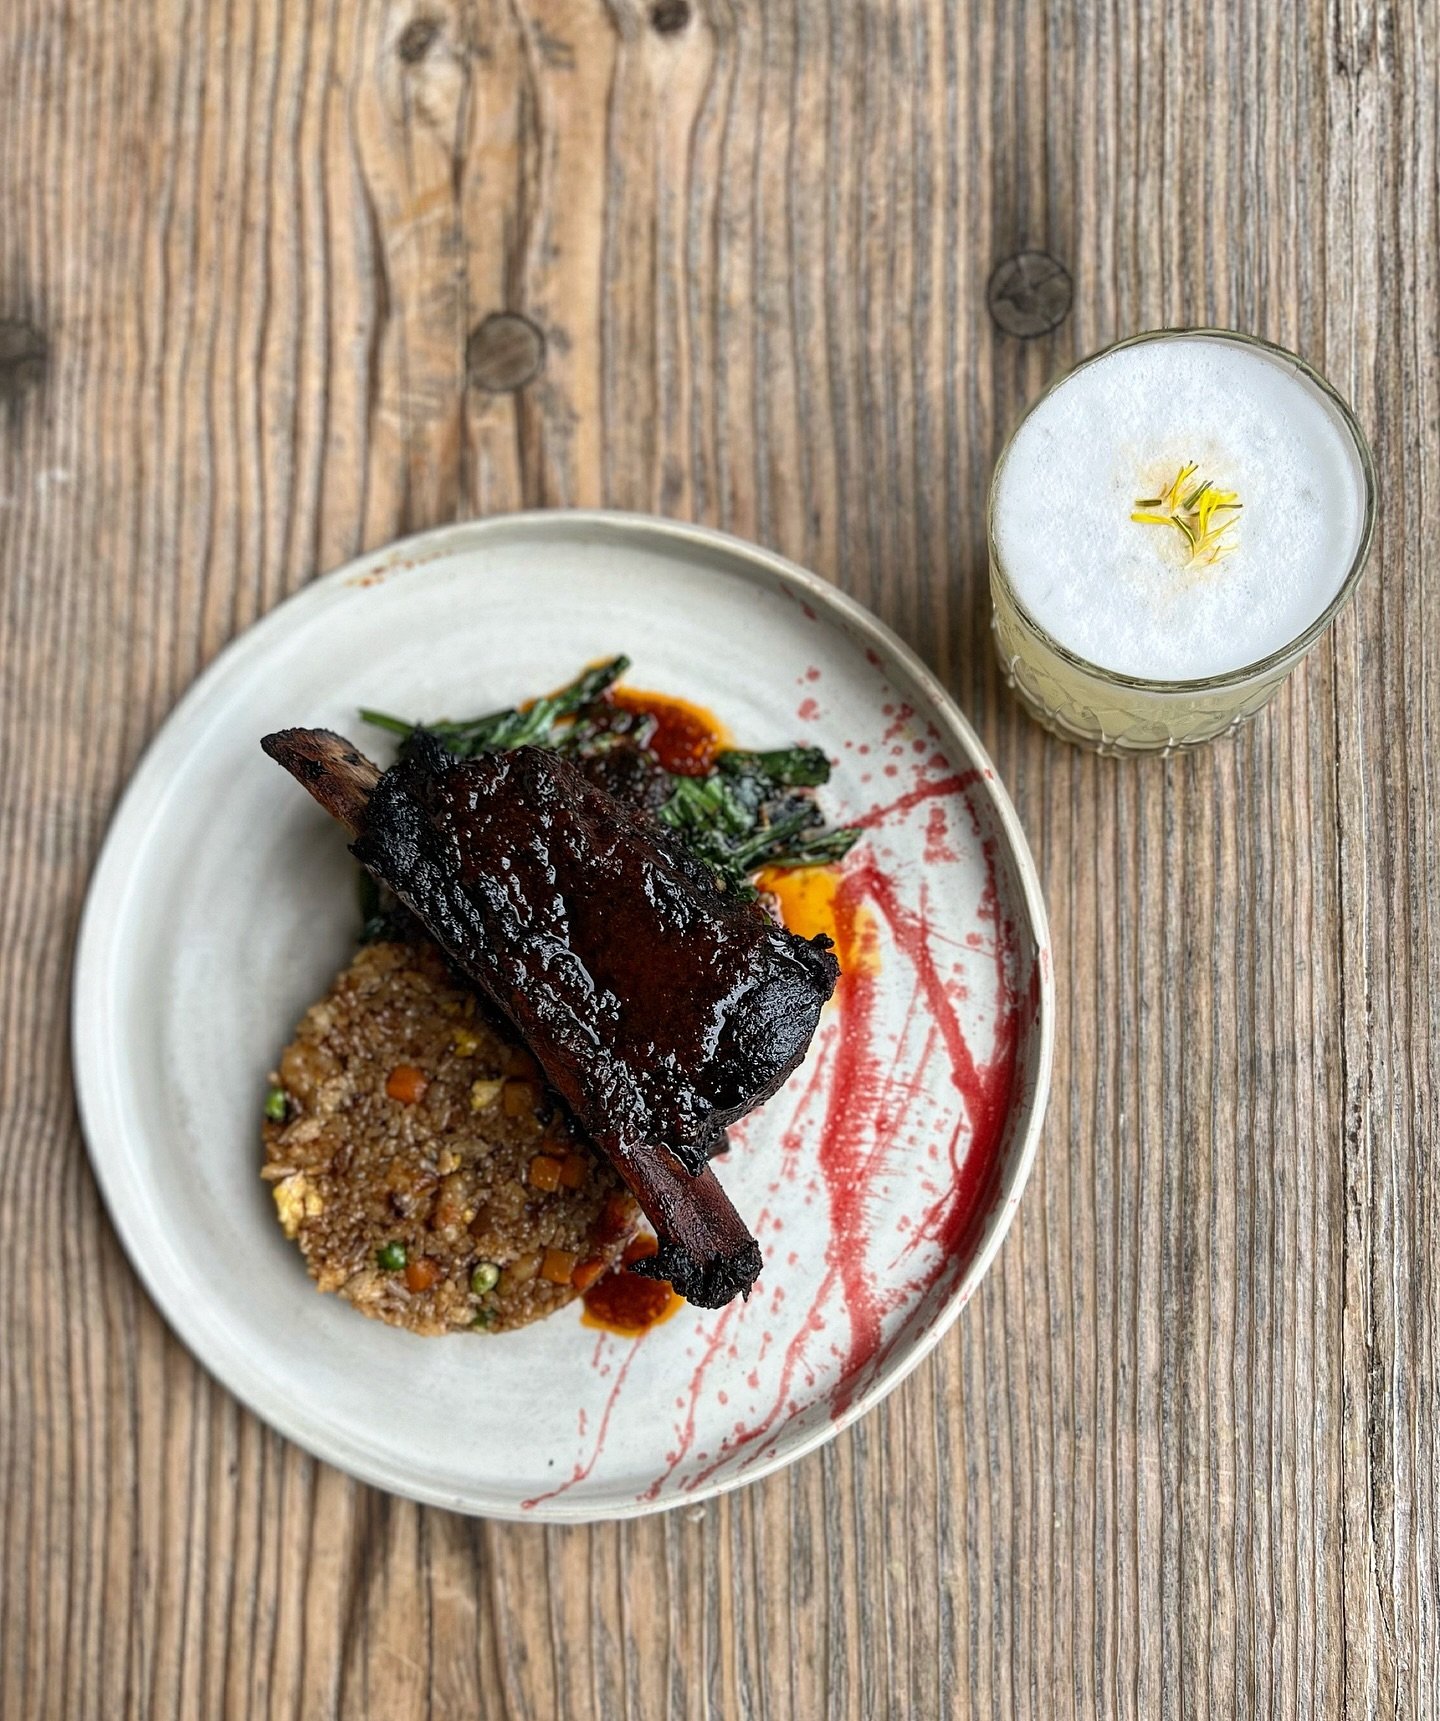 Spring vibes are in full swing! 
Weekend Special for 4/26 
Starts at 5PM and available while supplies last. 
Surf &amp; Turf 
Asian braised short rib, chili pan sauce, shrimp fried rice, stir fry culantro. 
Try our Bar Special! 
Dandelion Gin Fizz 
B